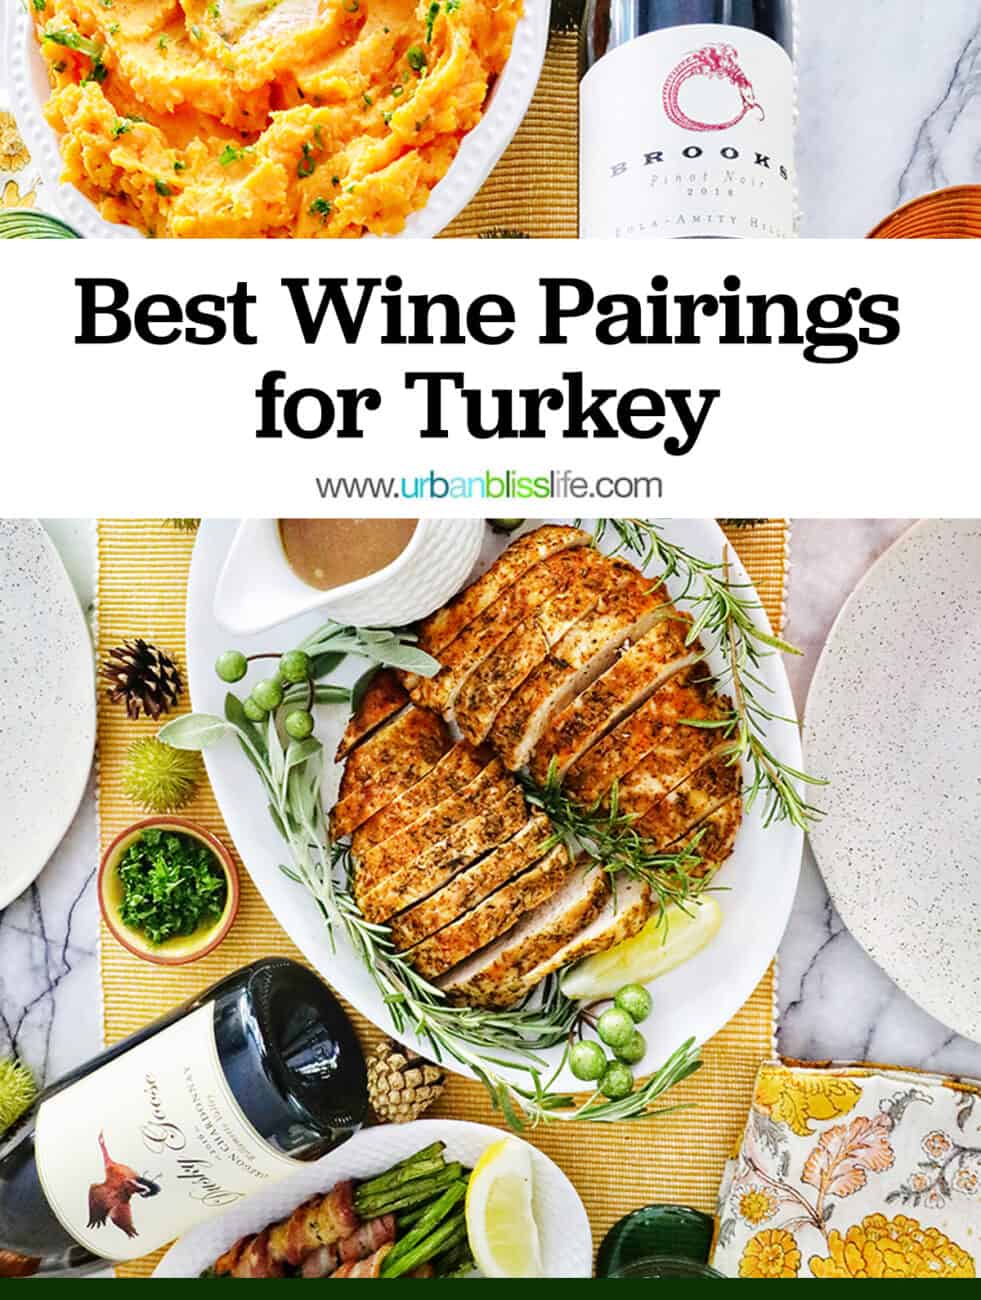 sliced turkey tenderloin with whipped sweet potatoes and bottles of wine with title text "Best Wine Pairings for Turkey."